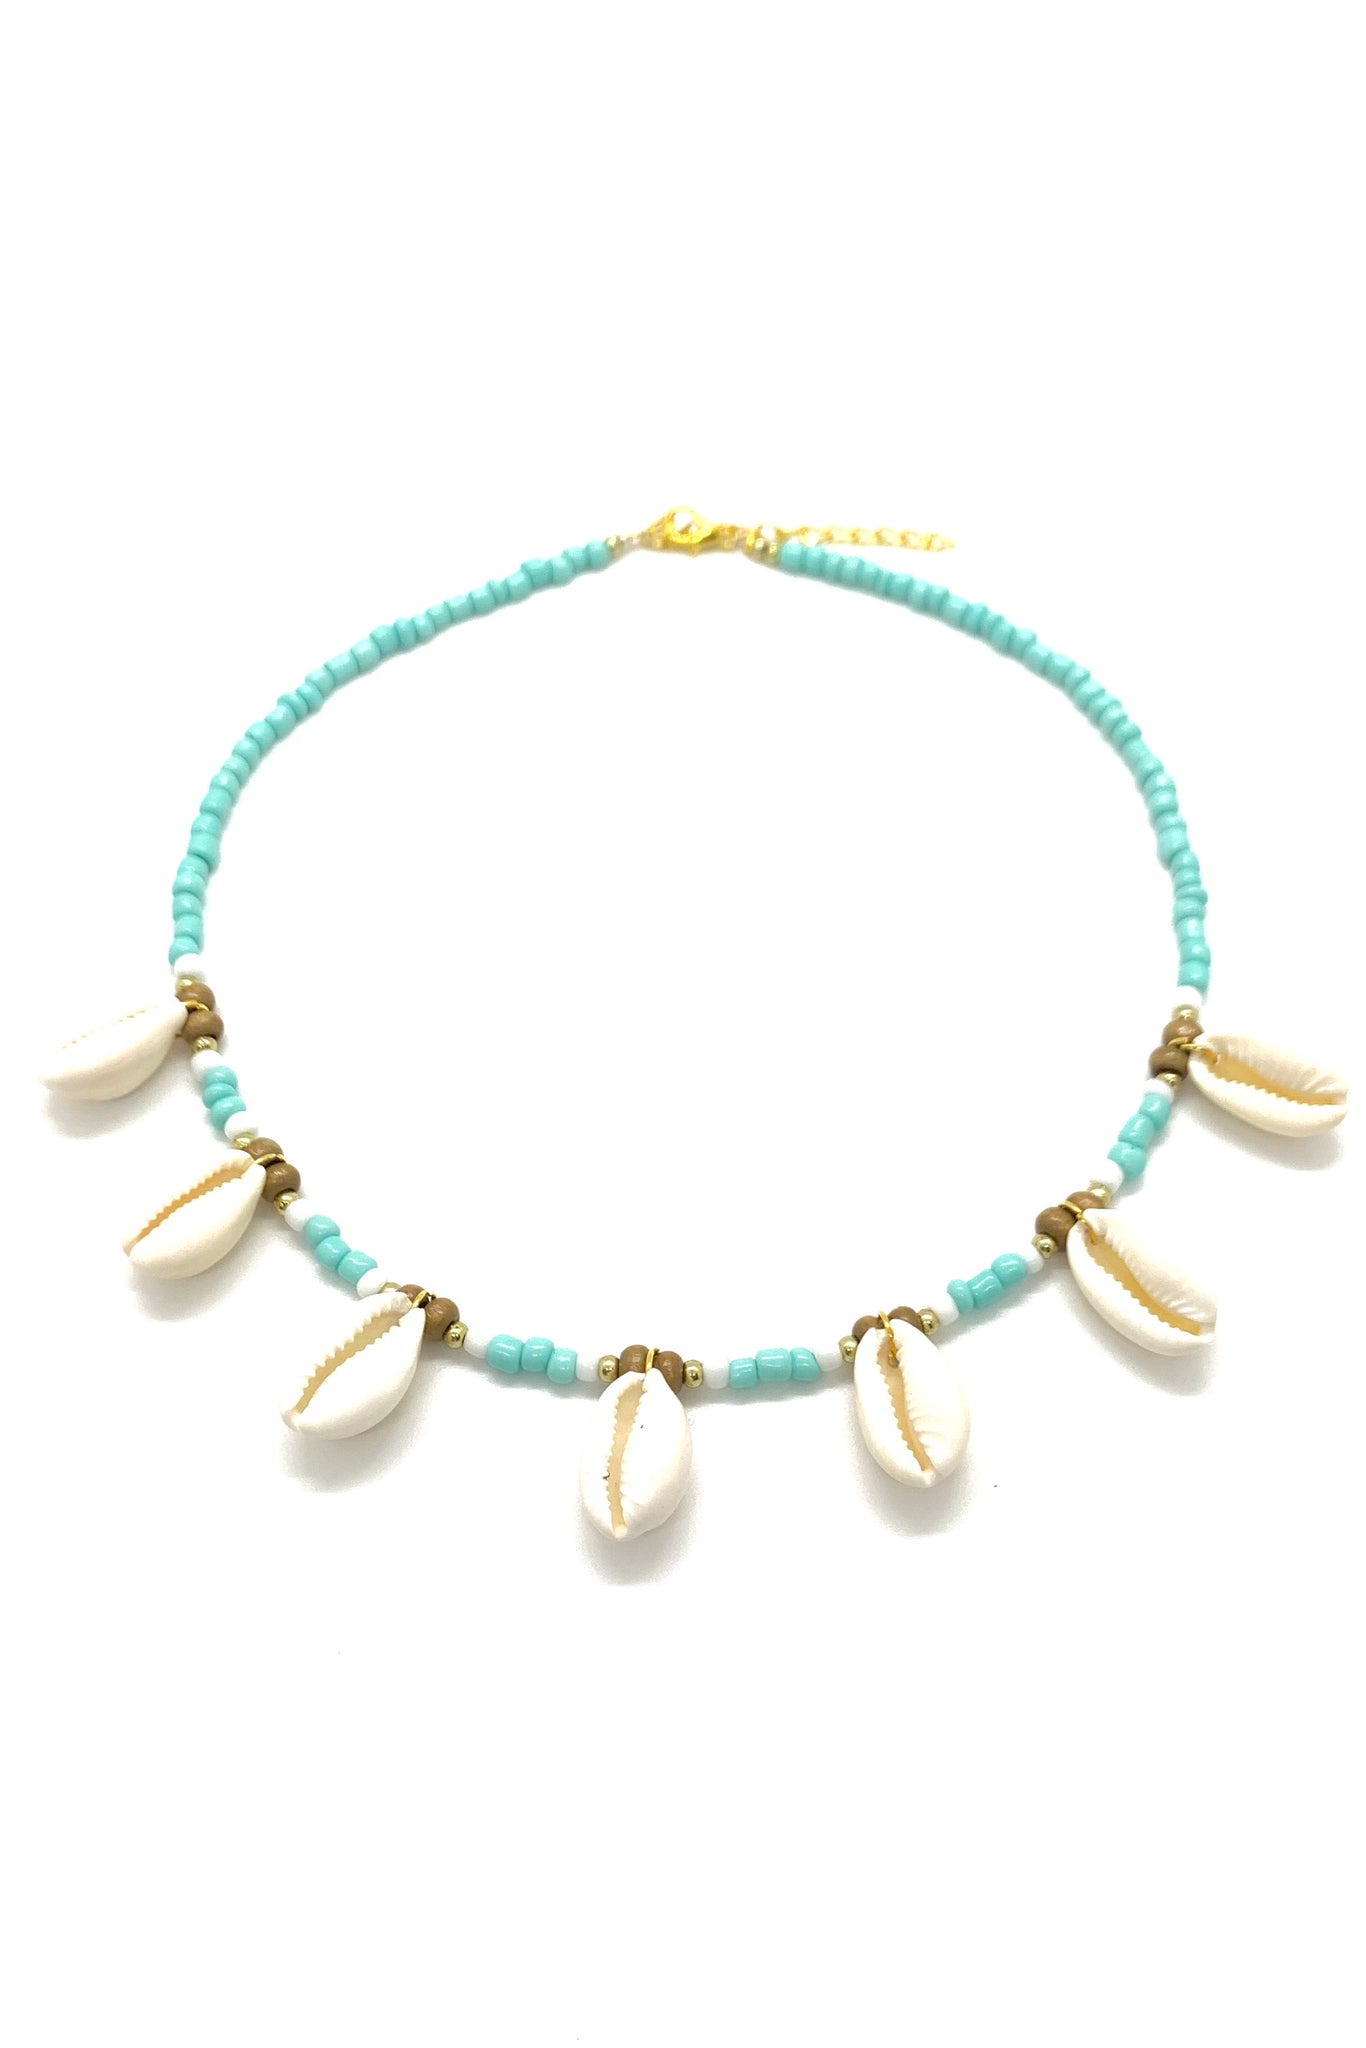 Short necklace with Shells & Turquoise beads